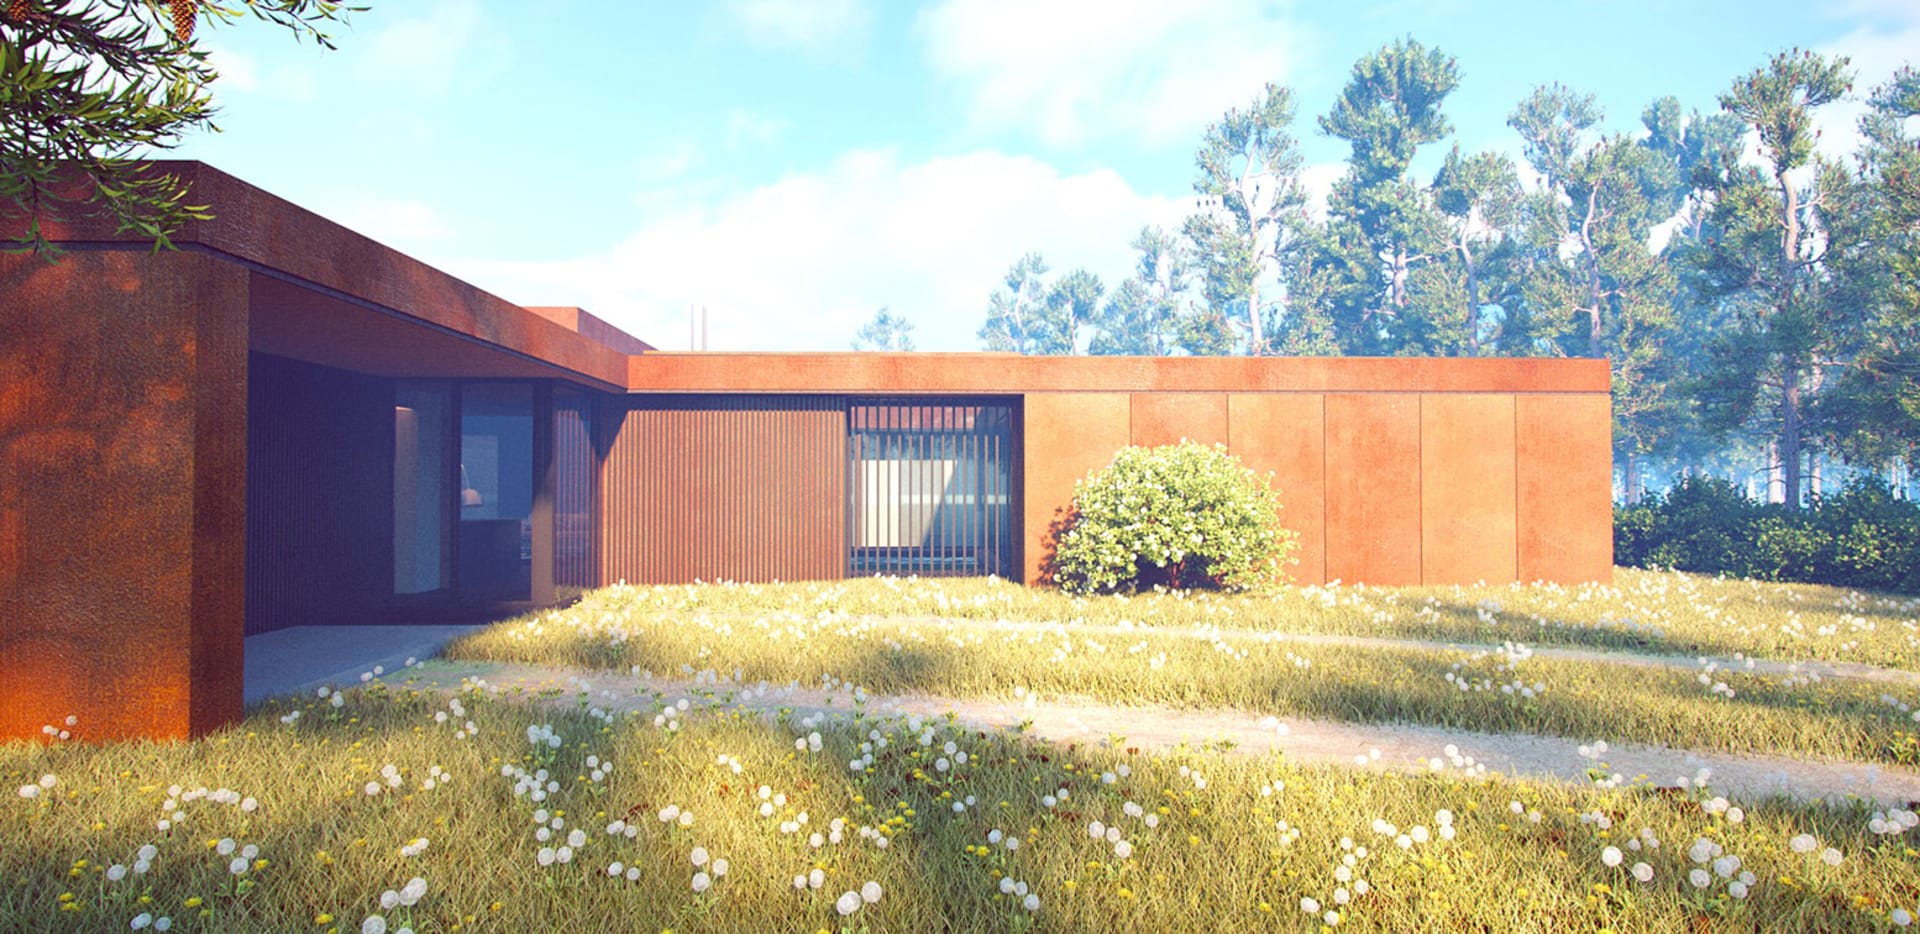 vray settings for exterior rendering sketchup rhino